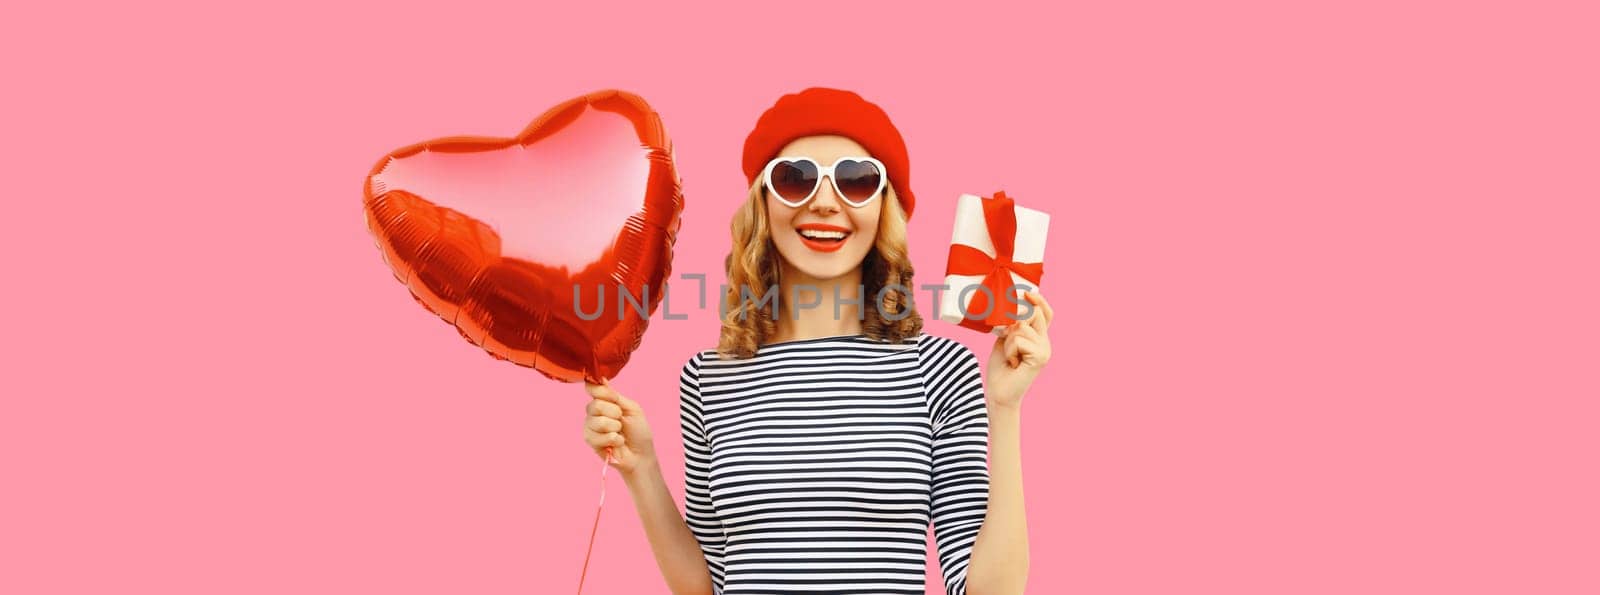 Cute portrait of happy smiling woman with red heart shaped balloon and gift box by Rohappy